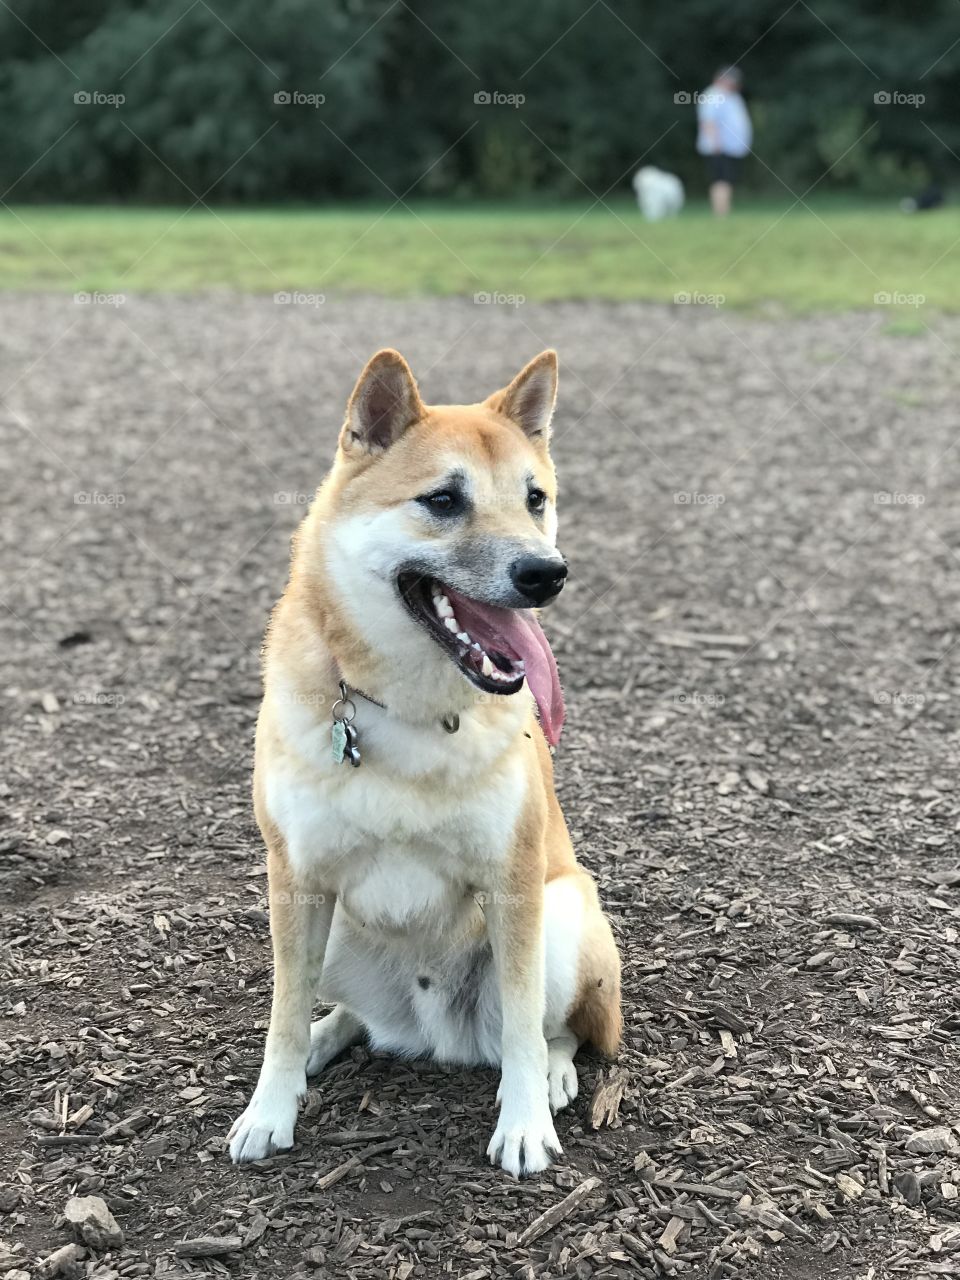 Dogs love the park